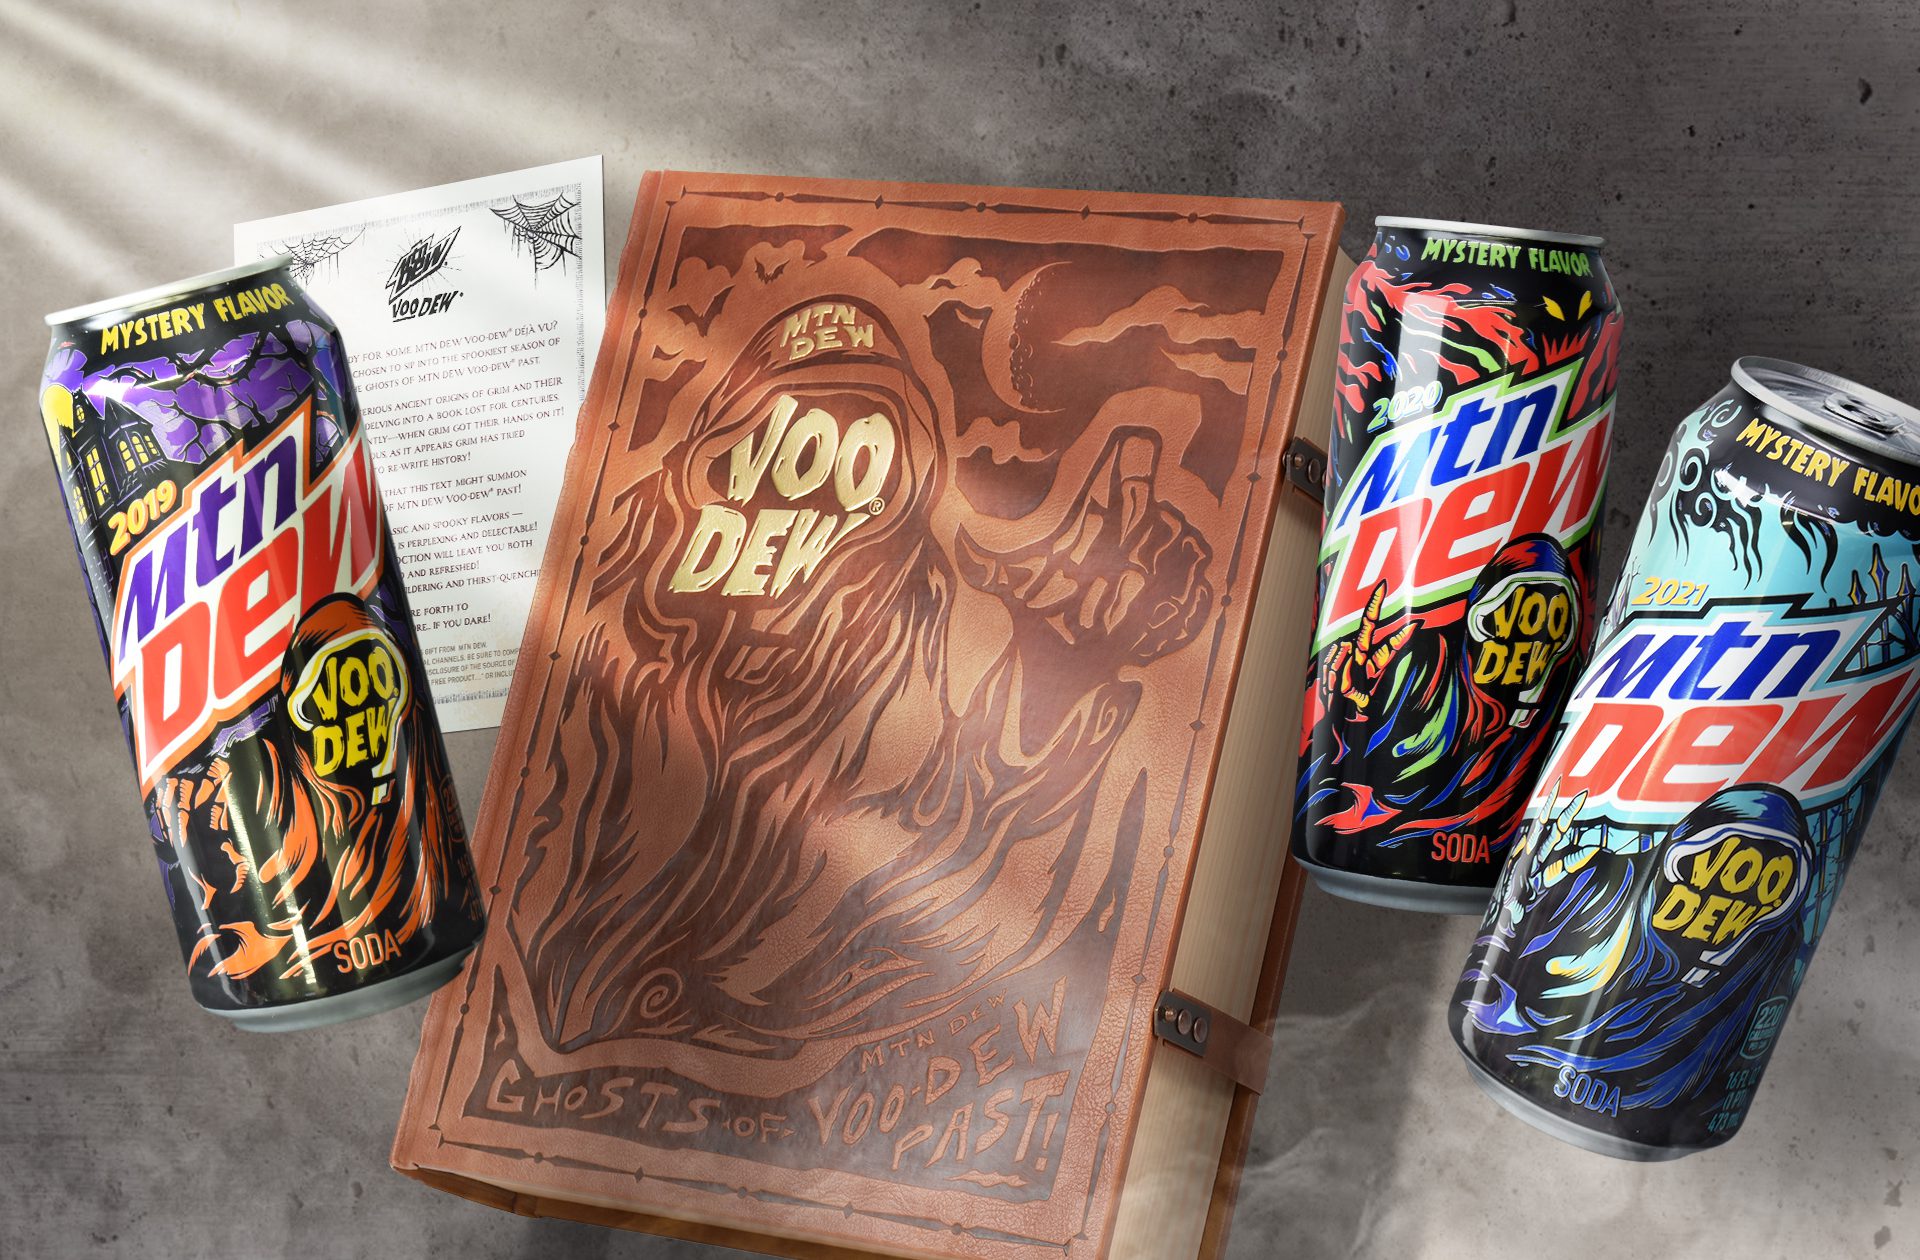 Photograph of a halloween themed influencer unboxing experience for Mountain Dew Voodew, featuring three cans of limited edition mtn dew flavors.